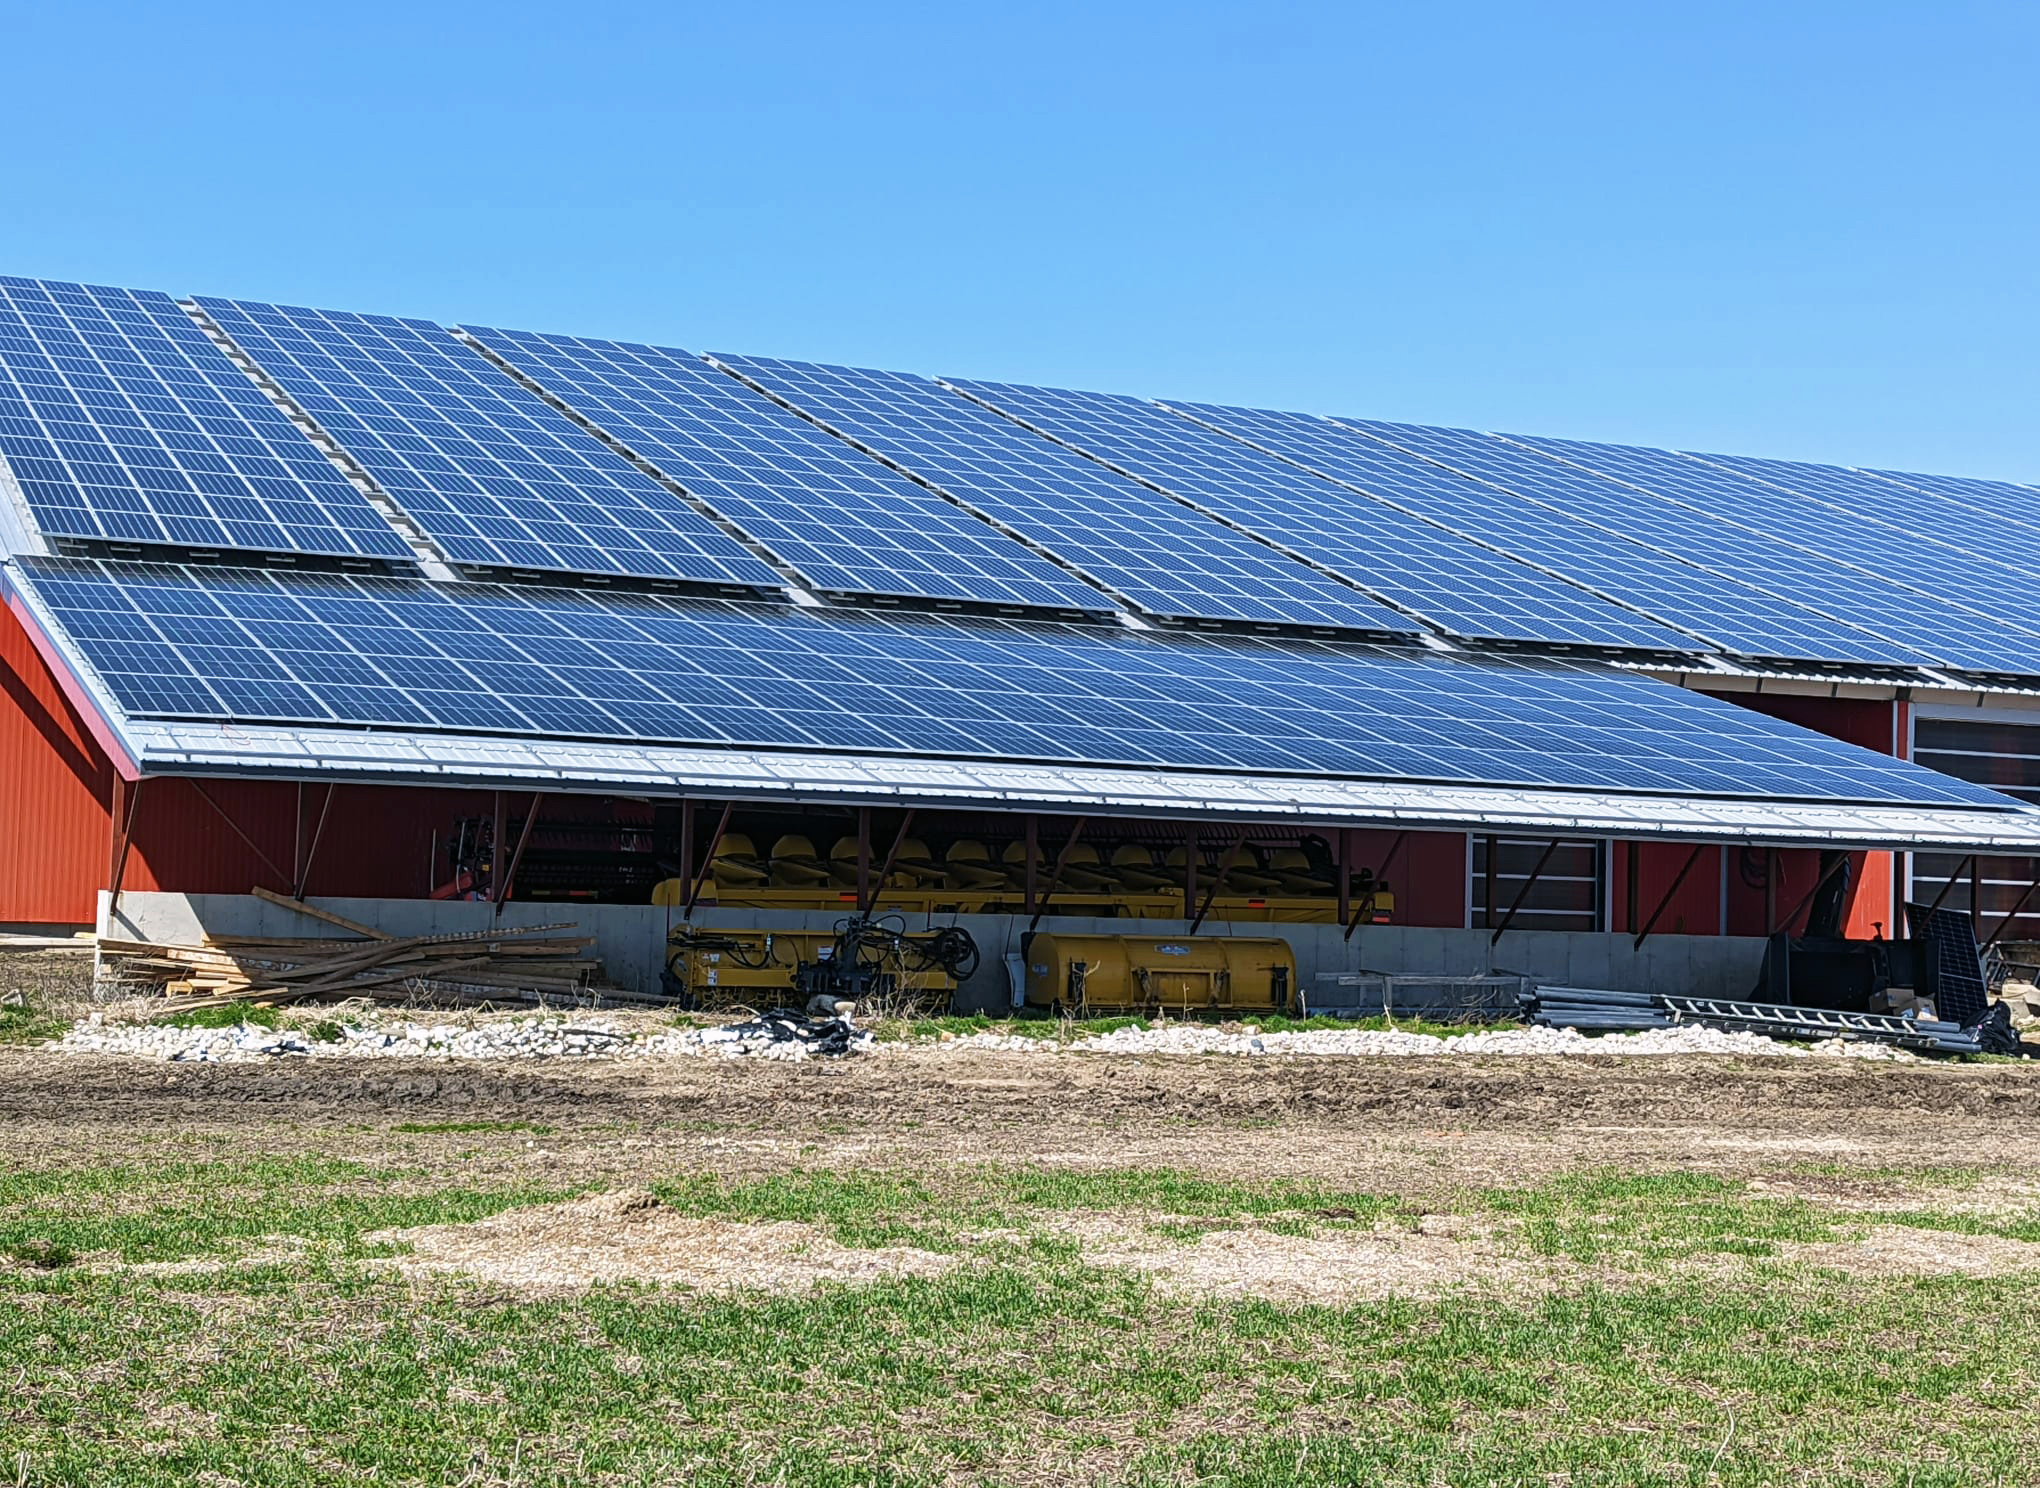 Commercial Trucking and warehouse operation solar panels, Palmerston, Ontario